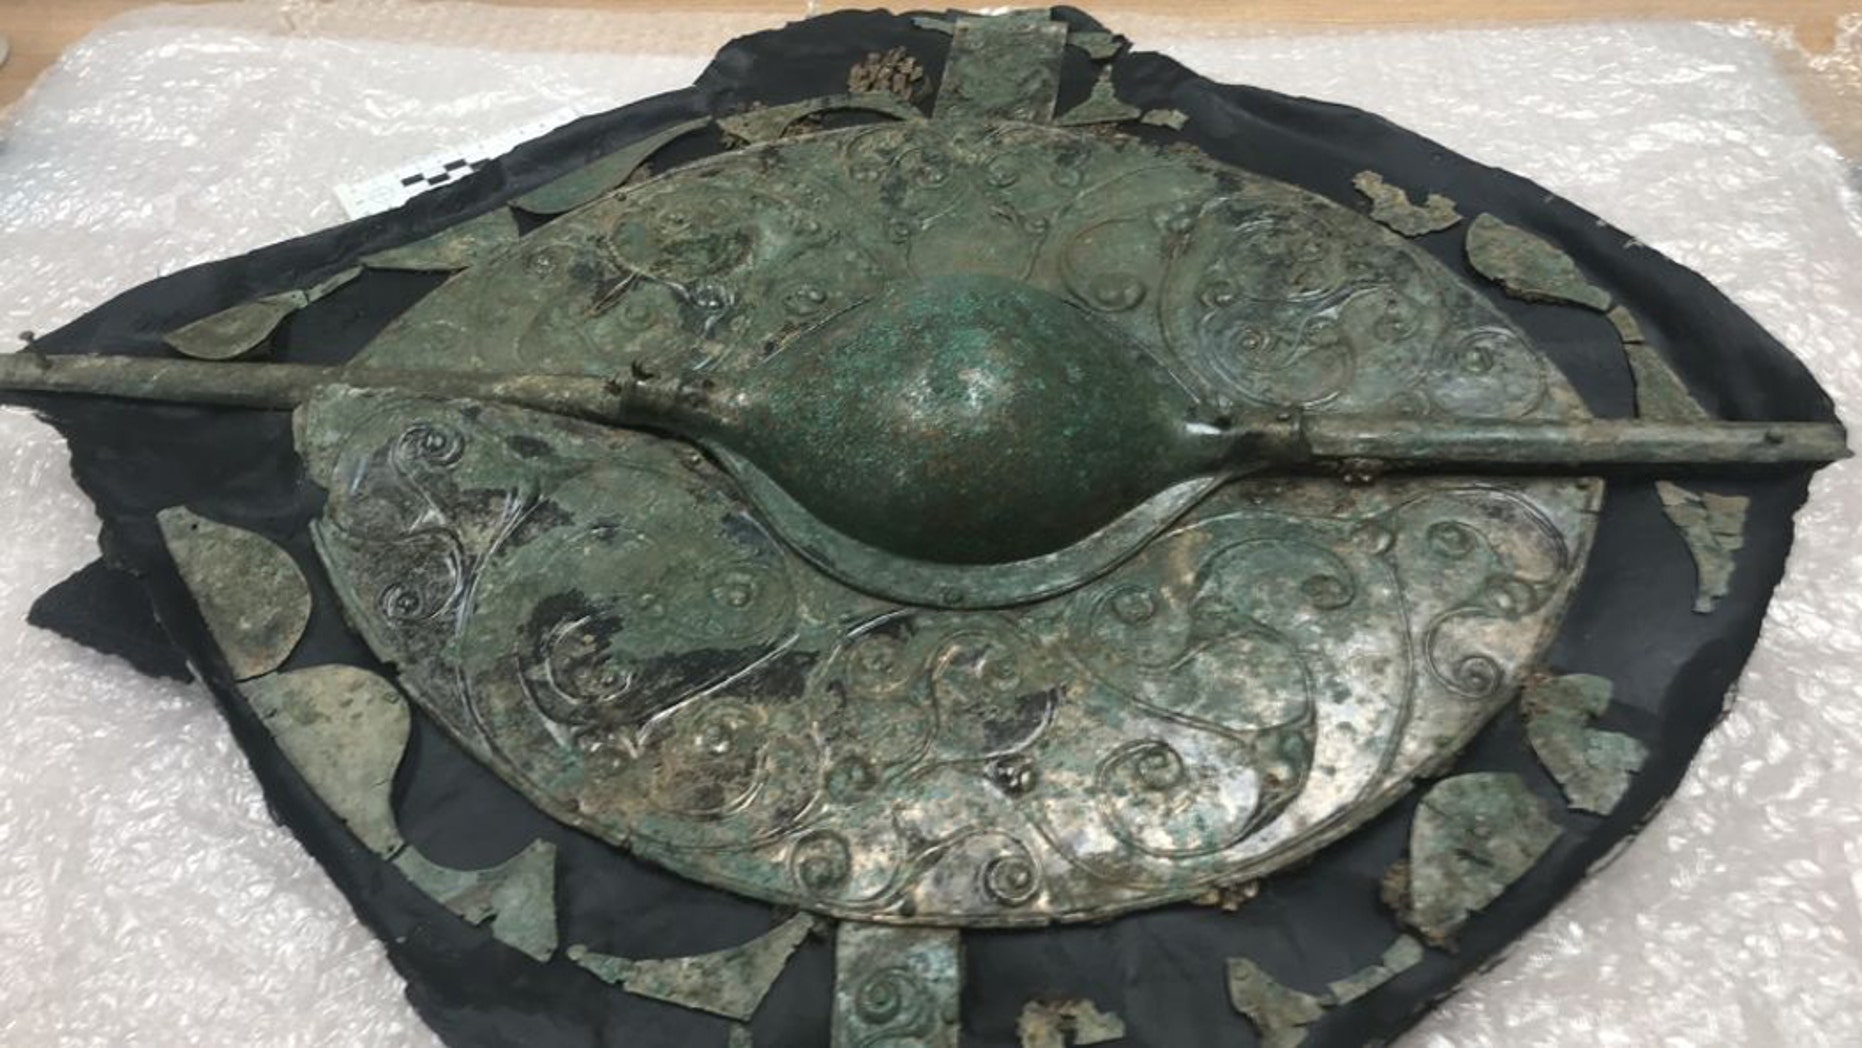 About 30 inches (75 centimeters) in diameter, this shield was found in July 2018; but it wasn't until conservation was complete that its decorations and details could be seen. (Credit: Map Archaeological Practice)